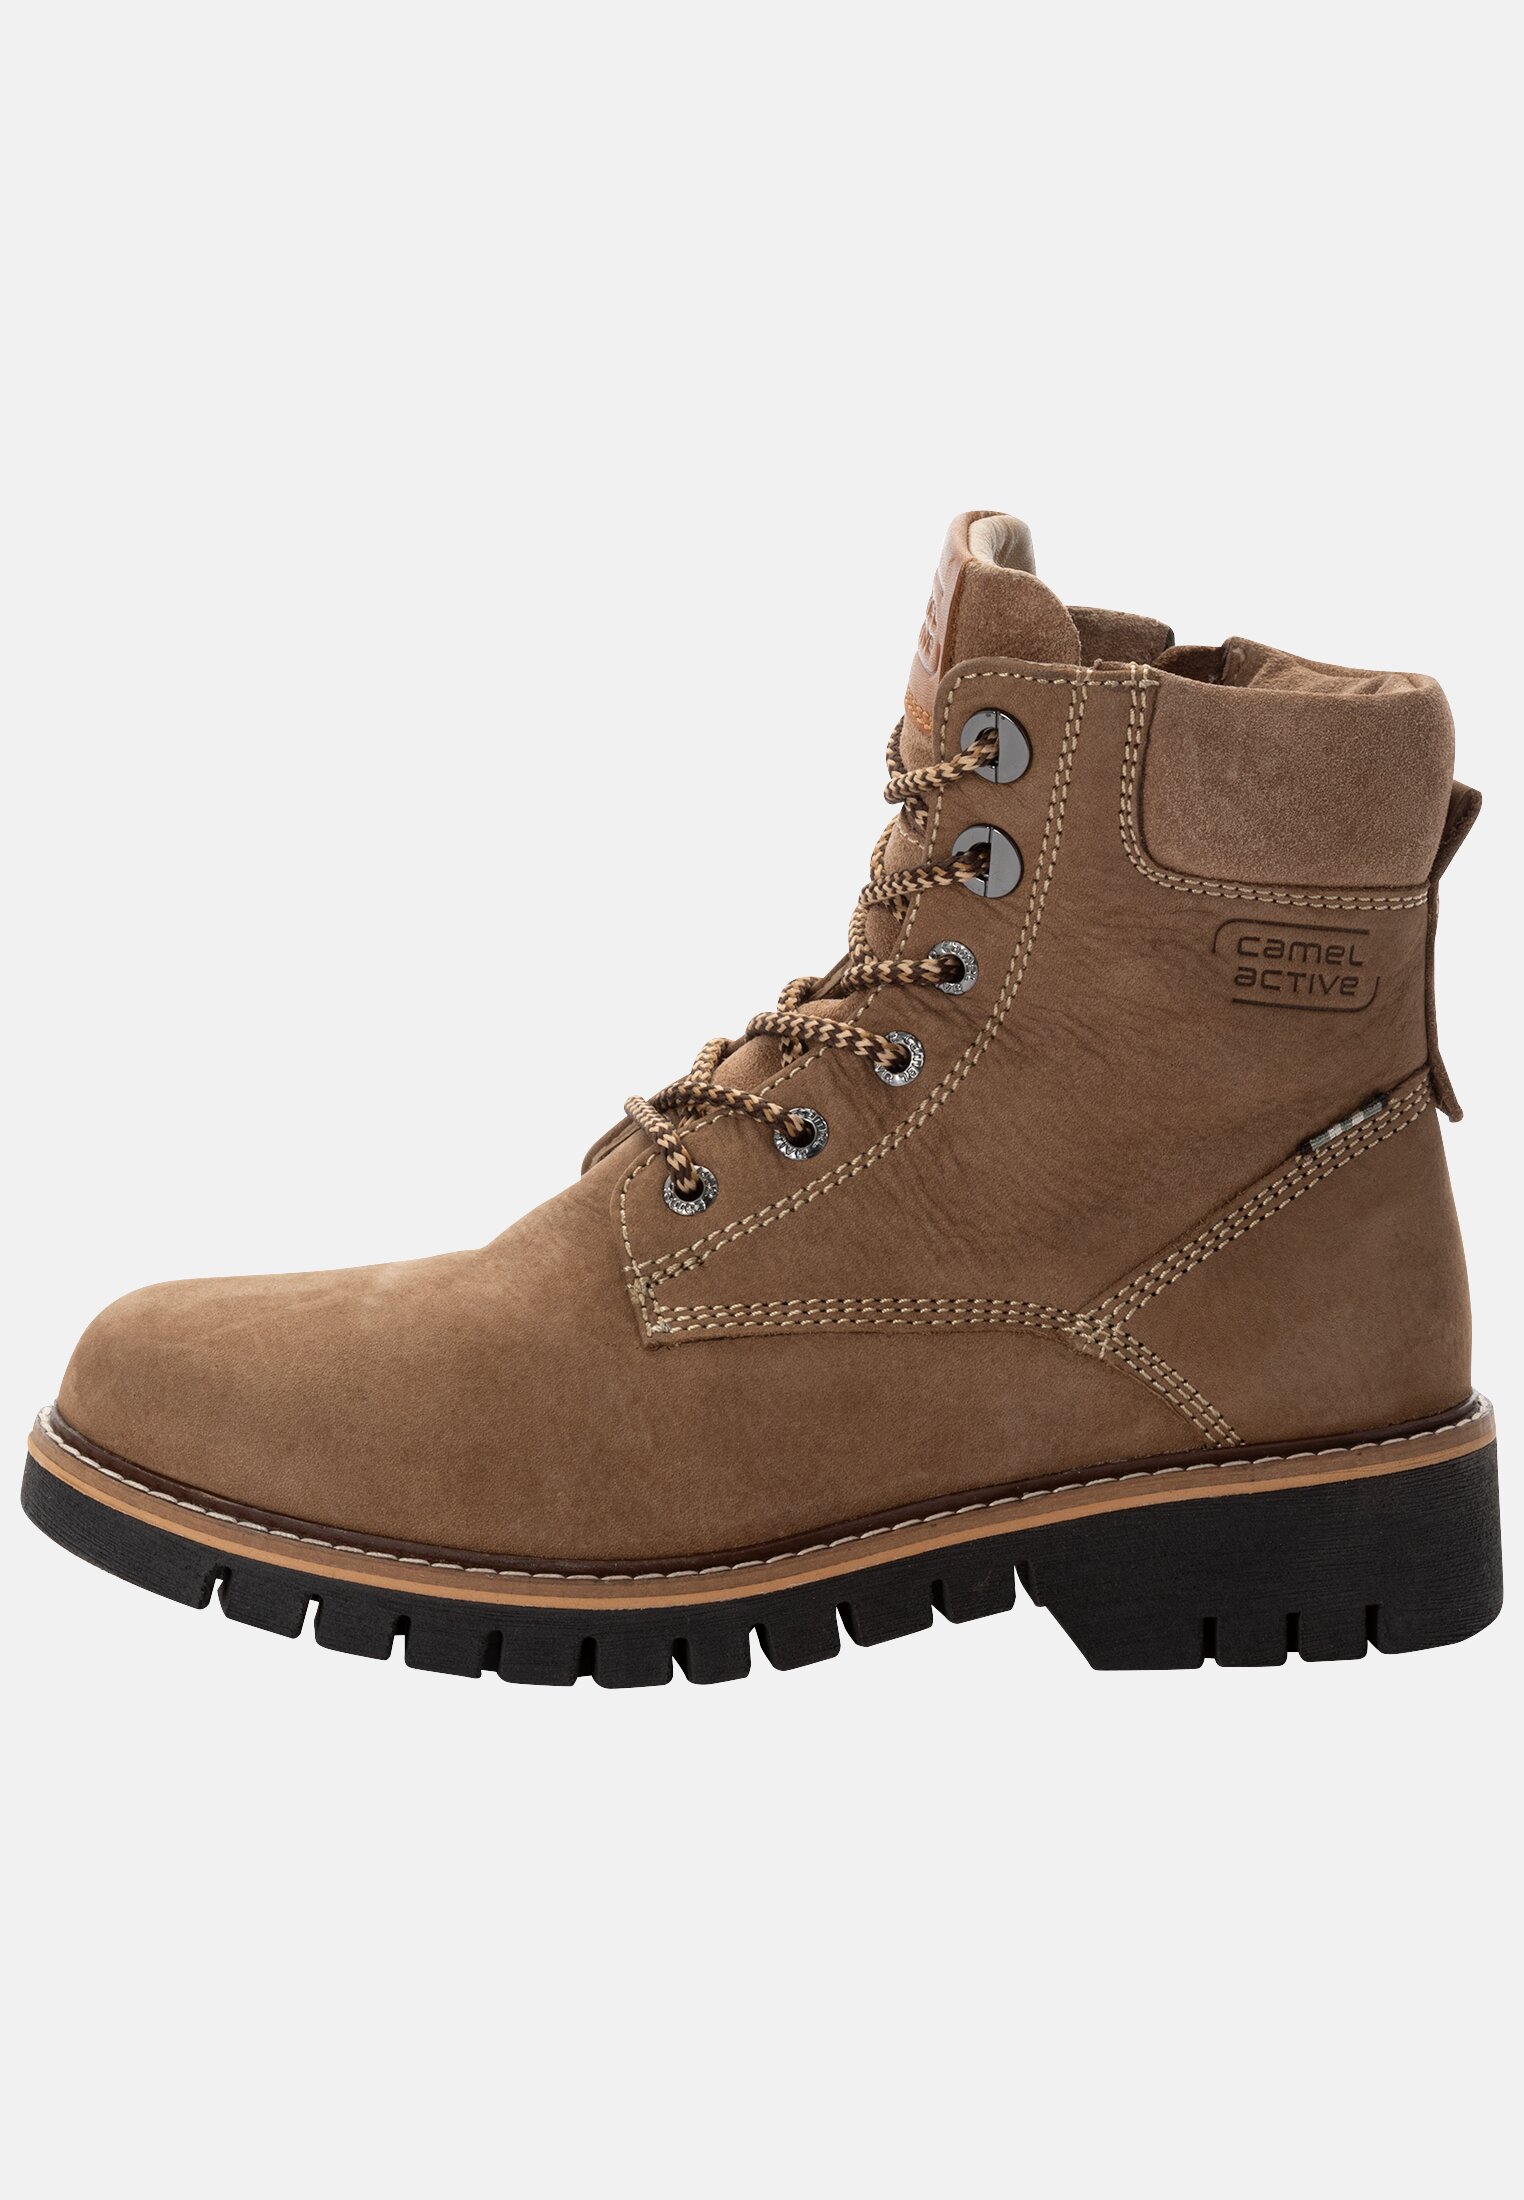 Camel Active Lace-up boot made from nubuck cowhide